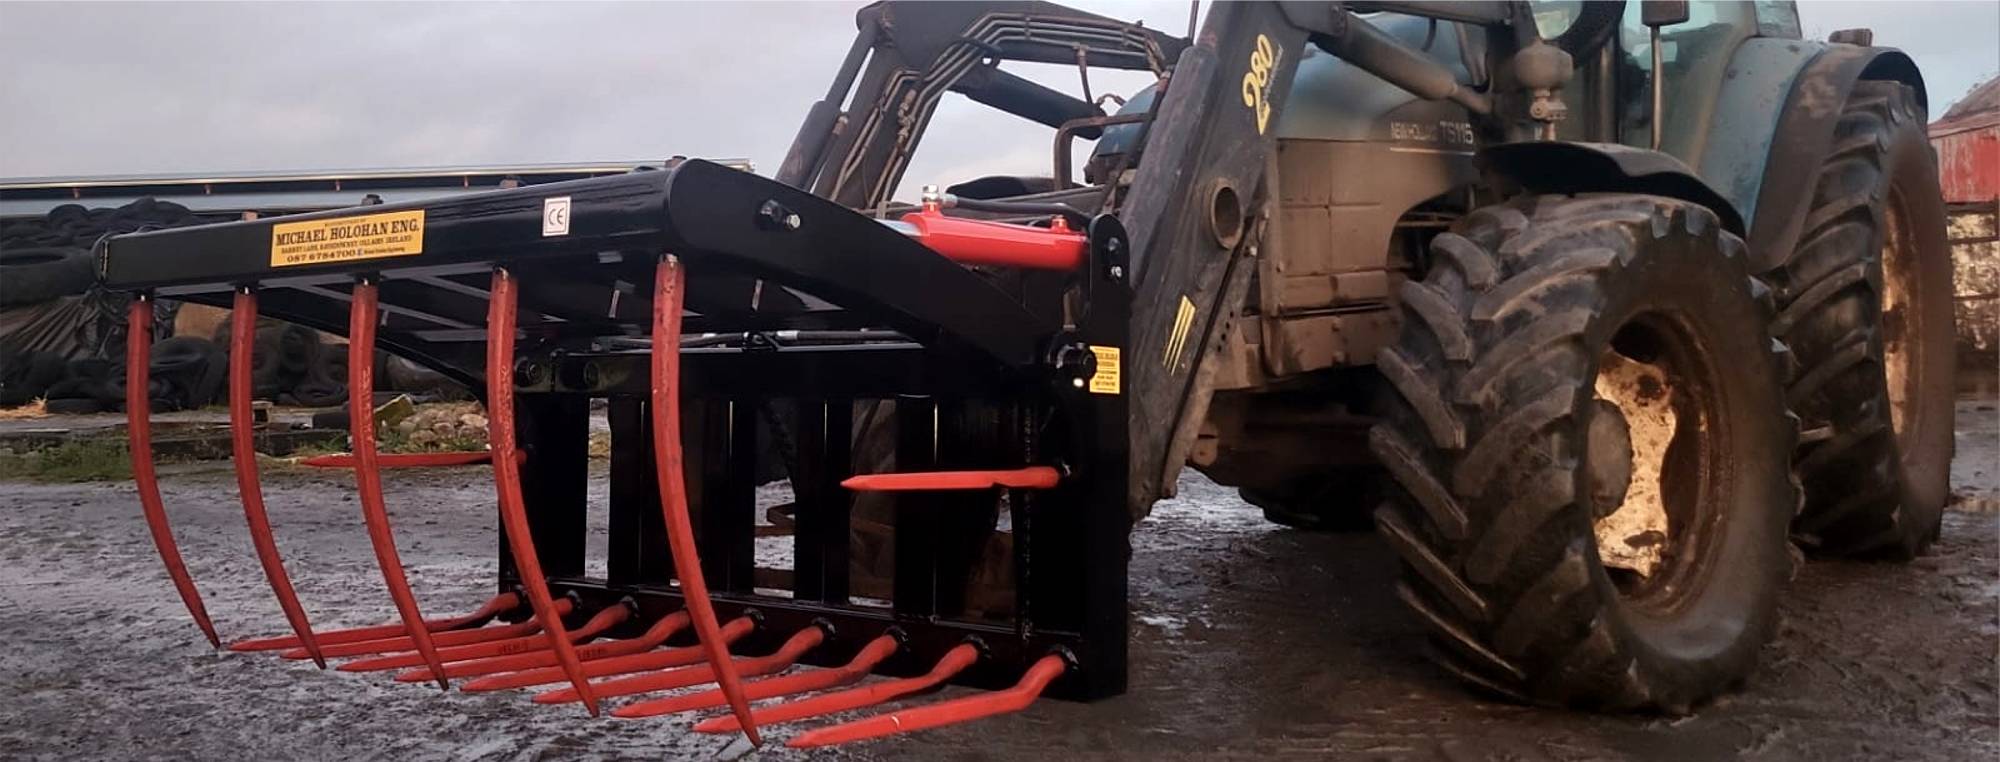 Heavy Duty Grab. Loader attachments manufactured by Michael Holohan Engineering, Laois, Ireland